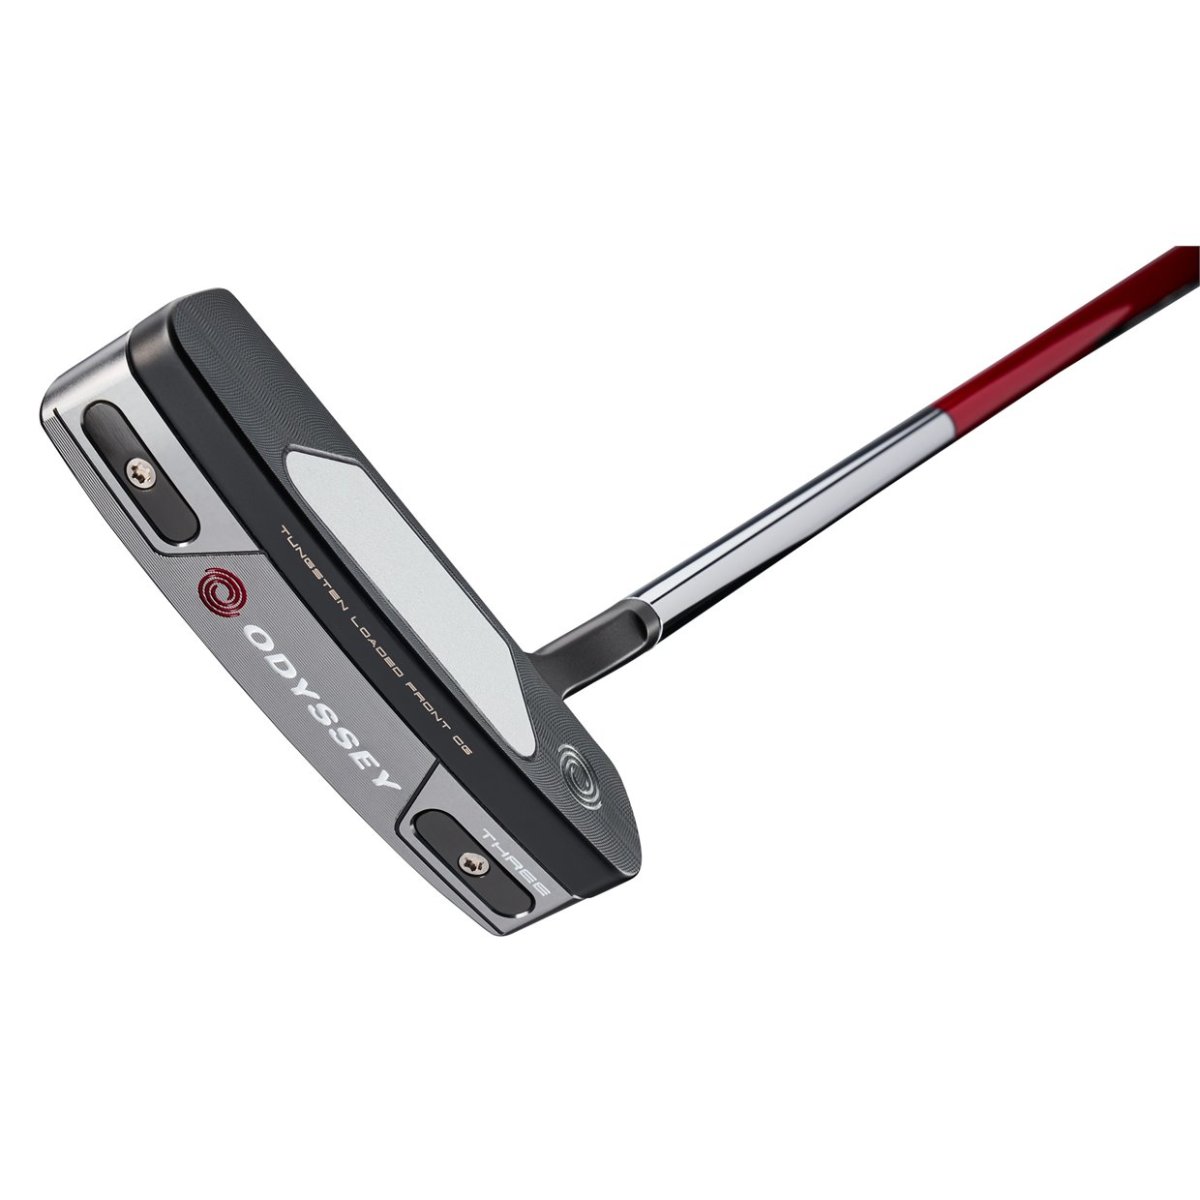 Find your 2022 Odyssey Tri-Hot 5K putter on the Morning Read Pro Shop, powered by GlobalGolf.